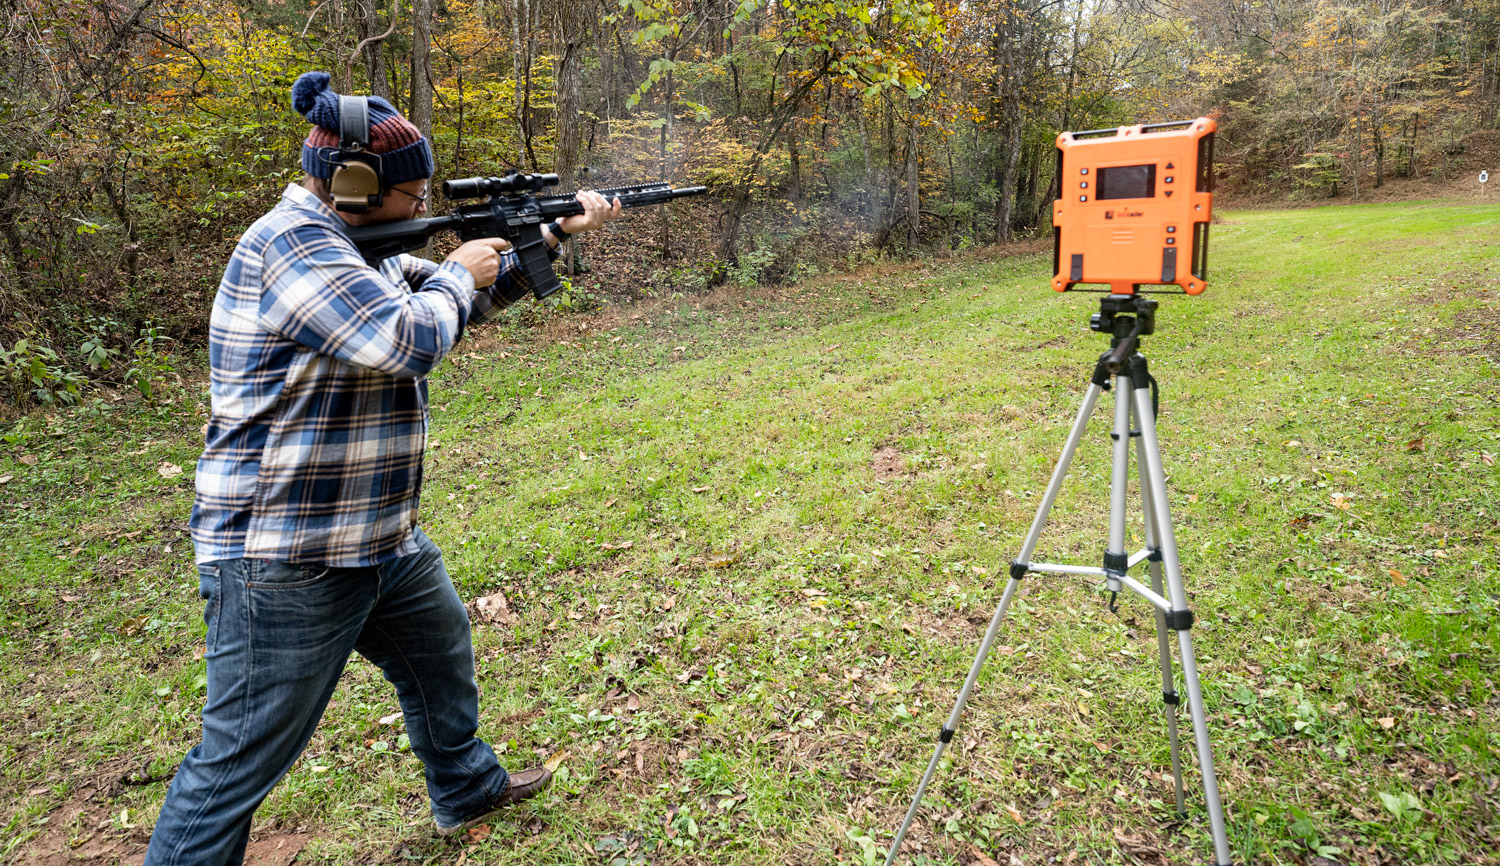 Shooting 450 Bushmaster with a chronograph to test muzzle velocity